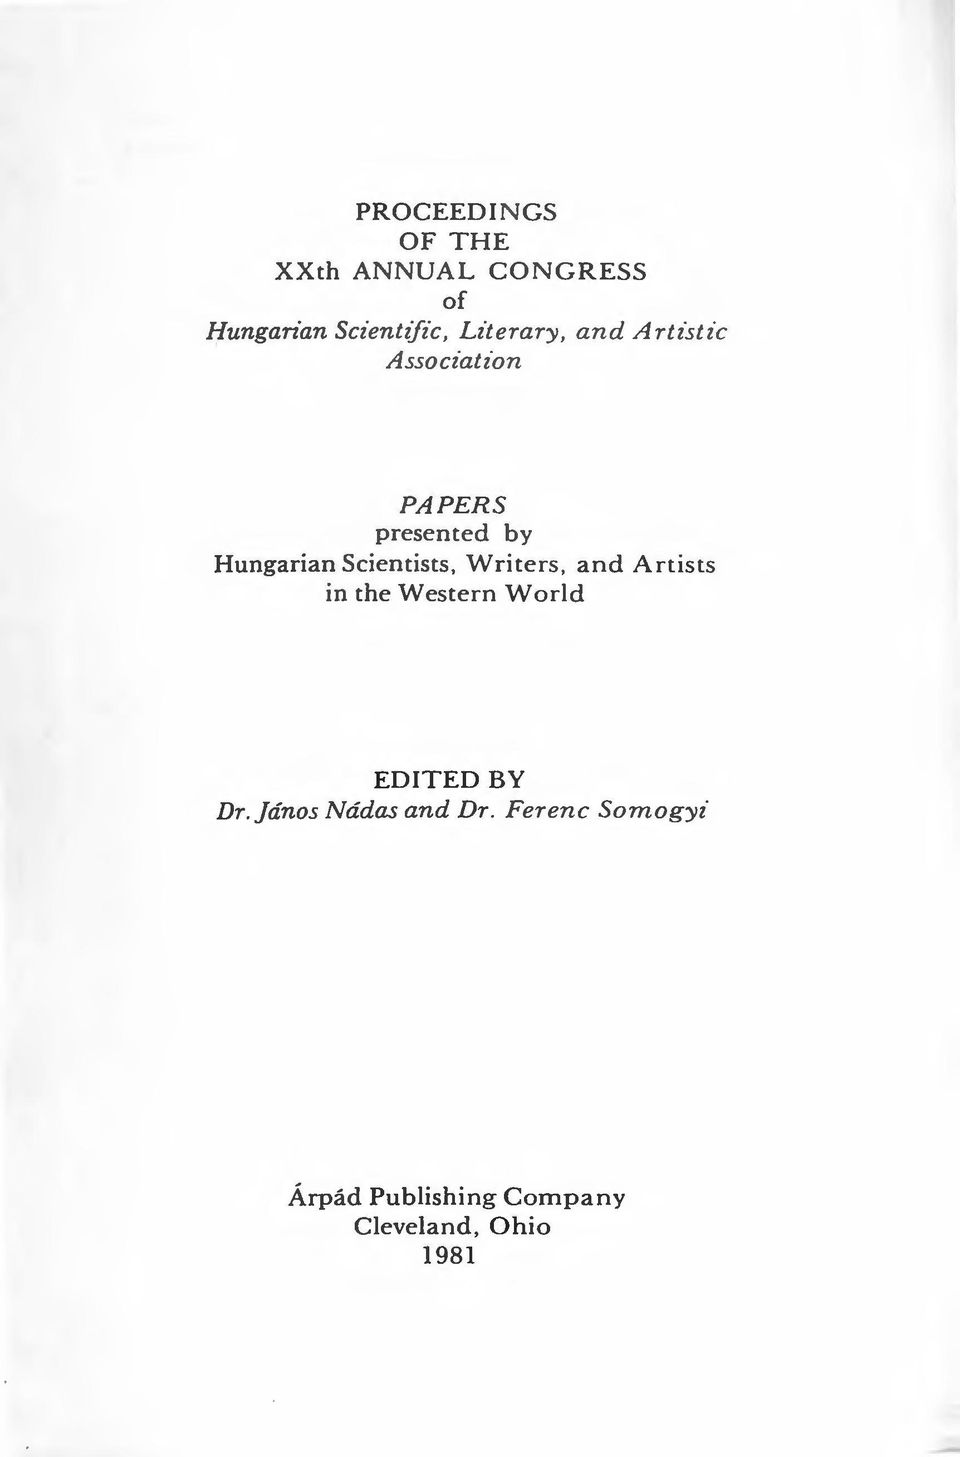 Scientists, Writers, and Artists in the Western World EDITED BY Dr.